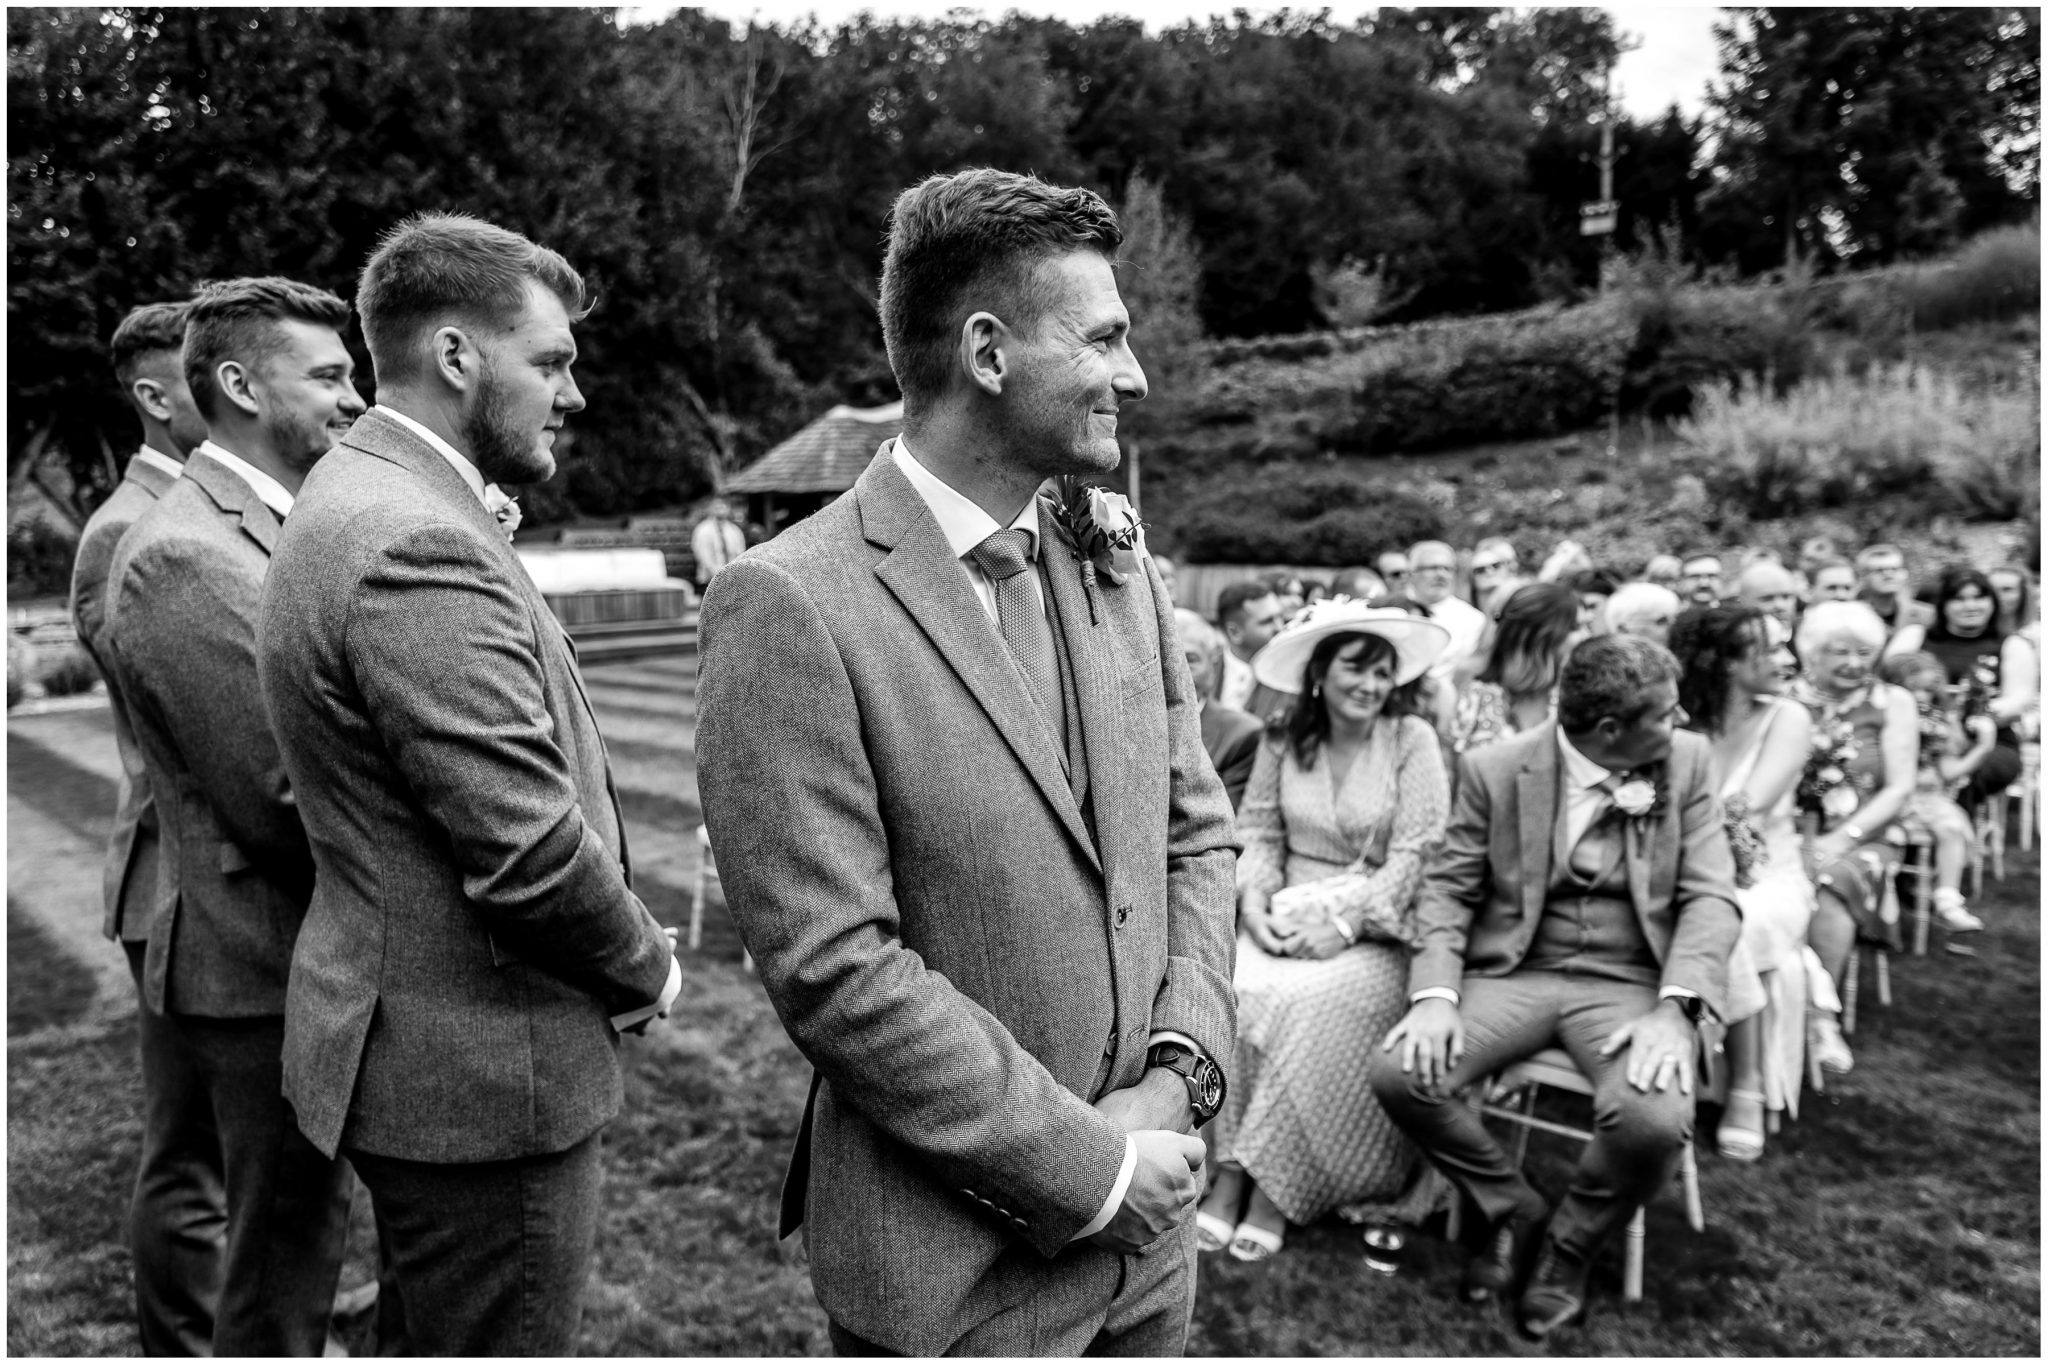 The groom watches as the bridal party walk down the aisle